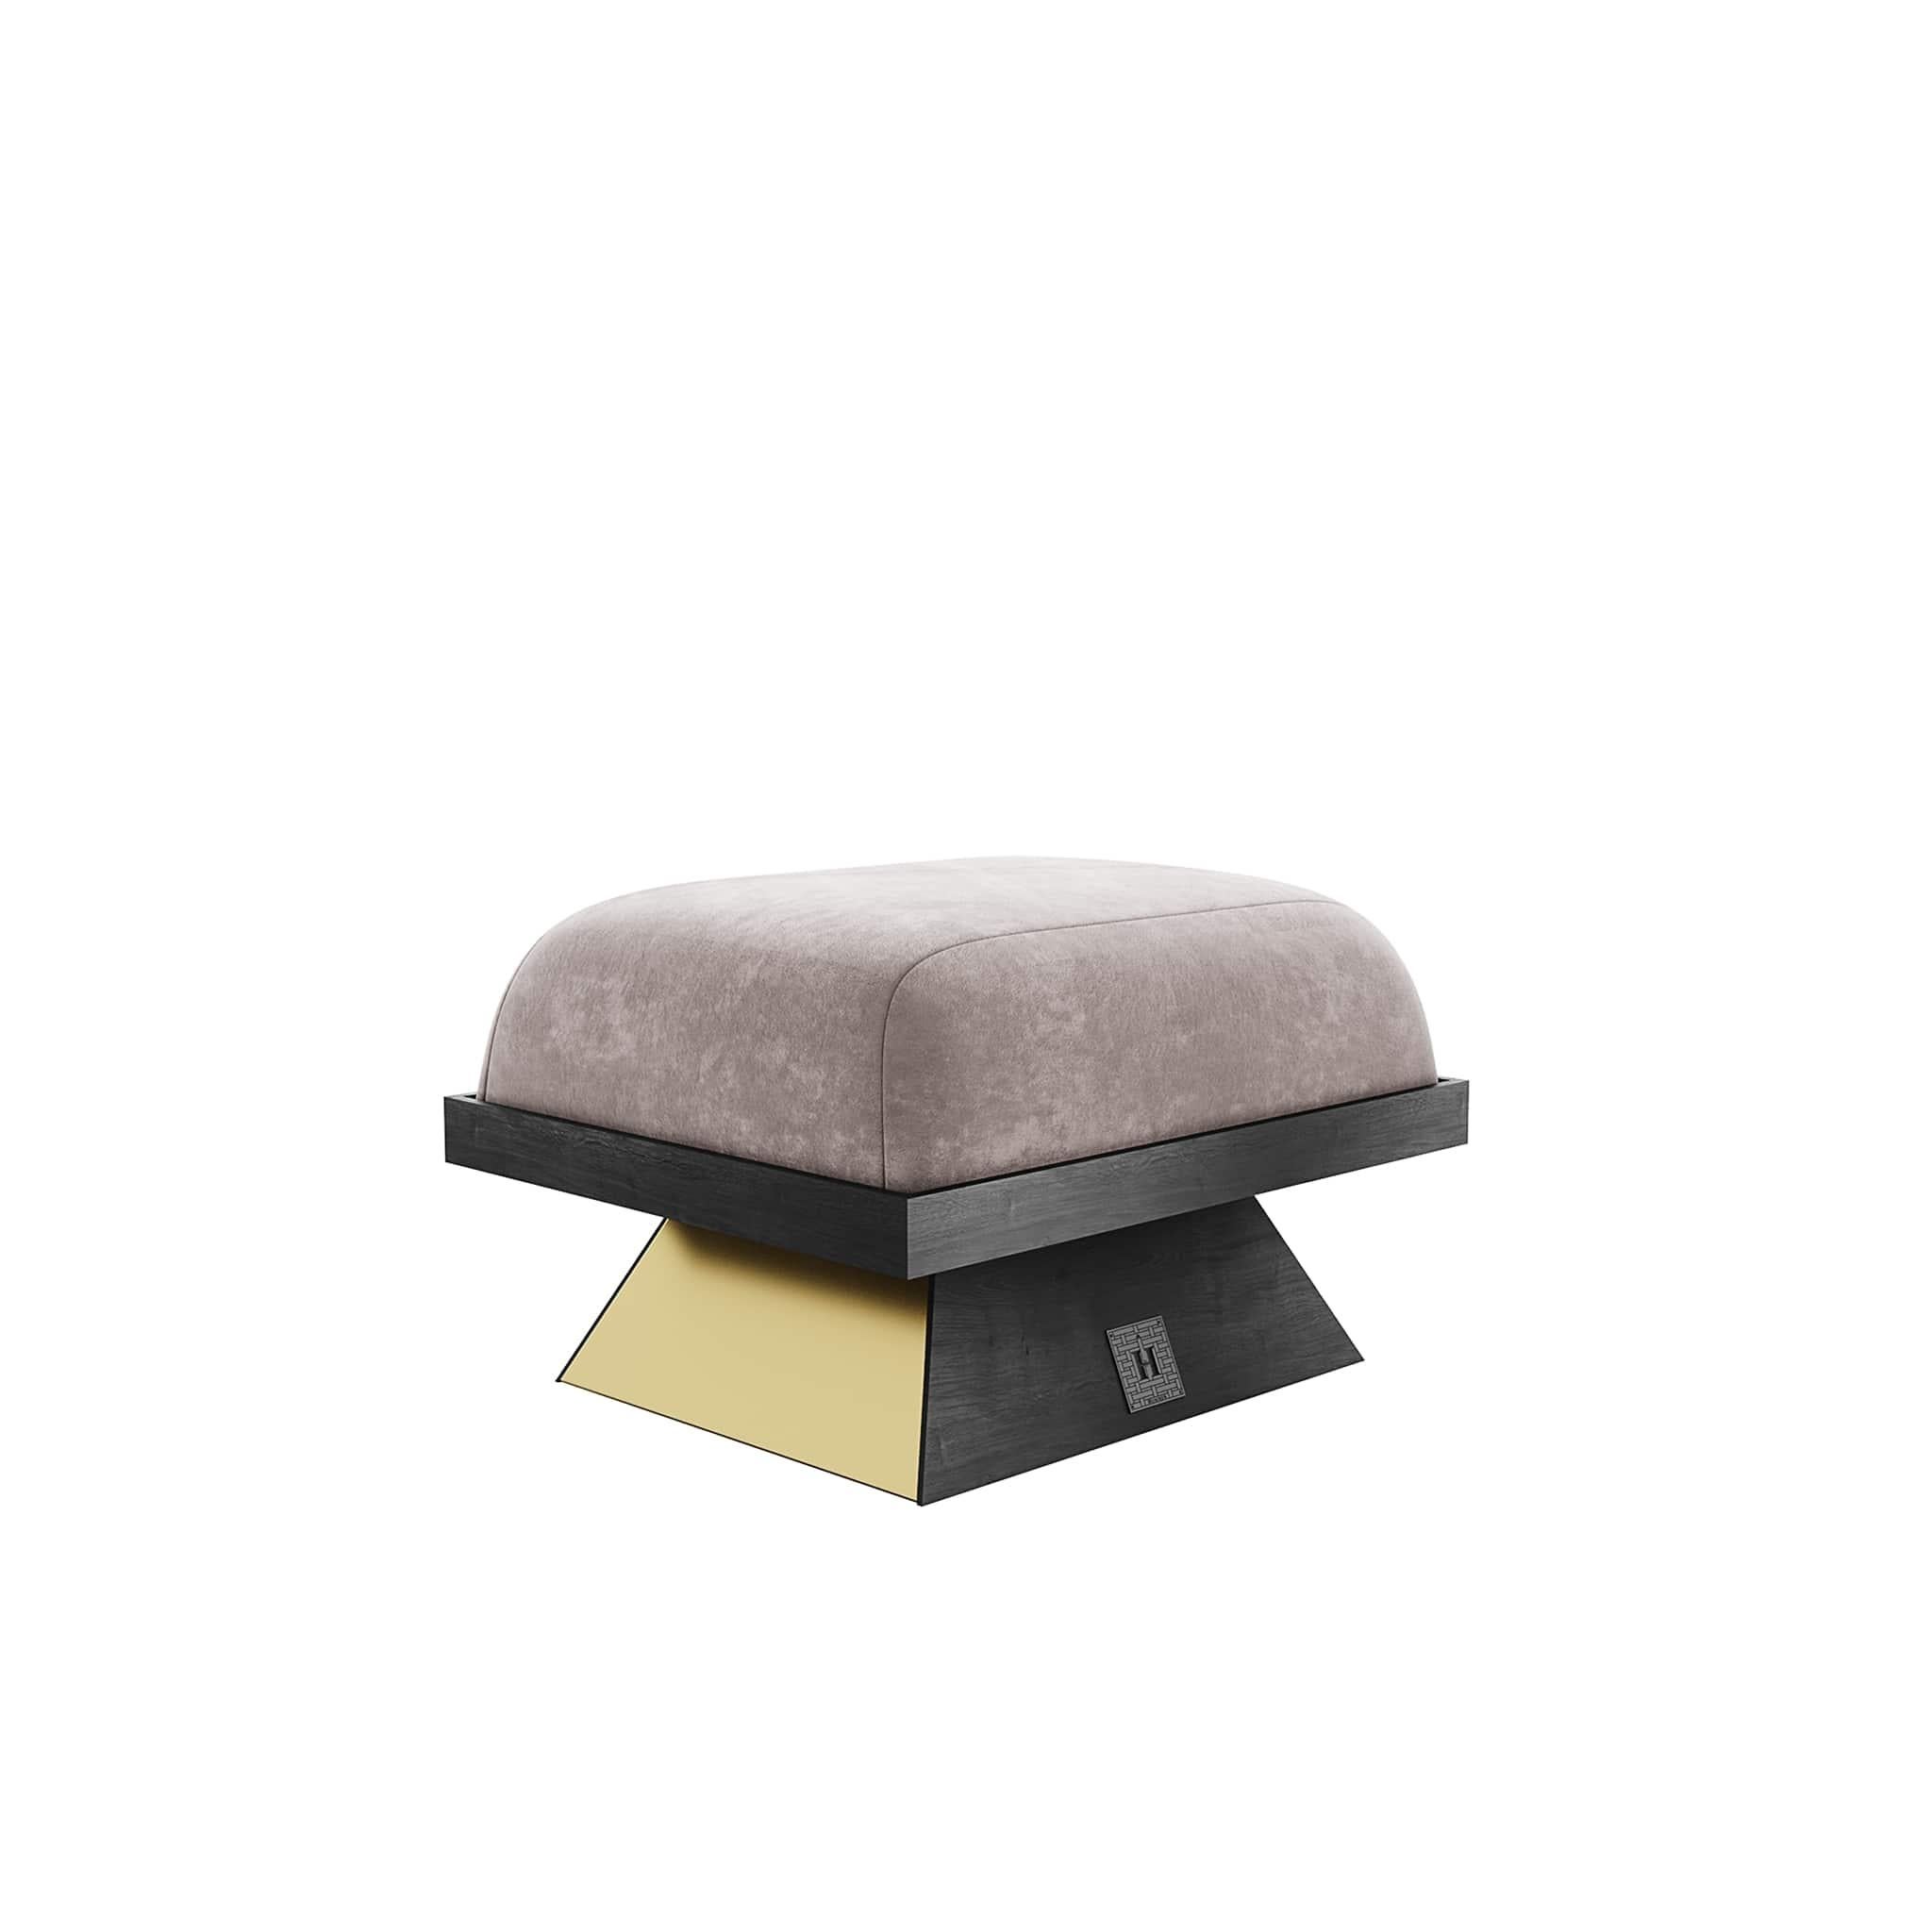 Modern Moa stool Upholstered in Suede and Wengue ash wood polished brass

Moa stool is an modern design stool. It is upholstered in suede and structure in matte wengue ash wood with details in polished brass. Its design expresses a solemn geometry